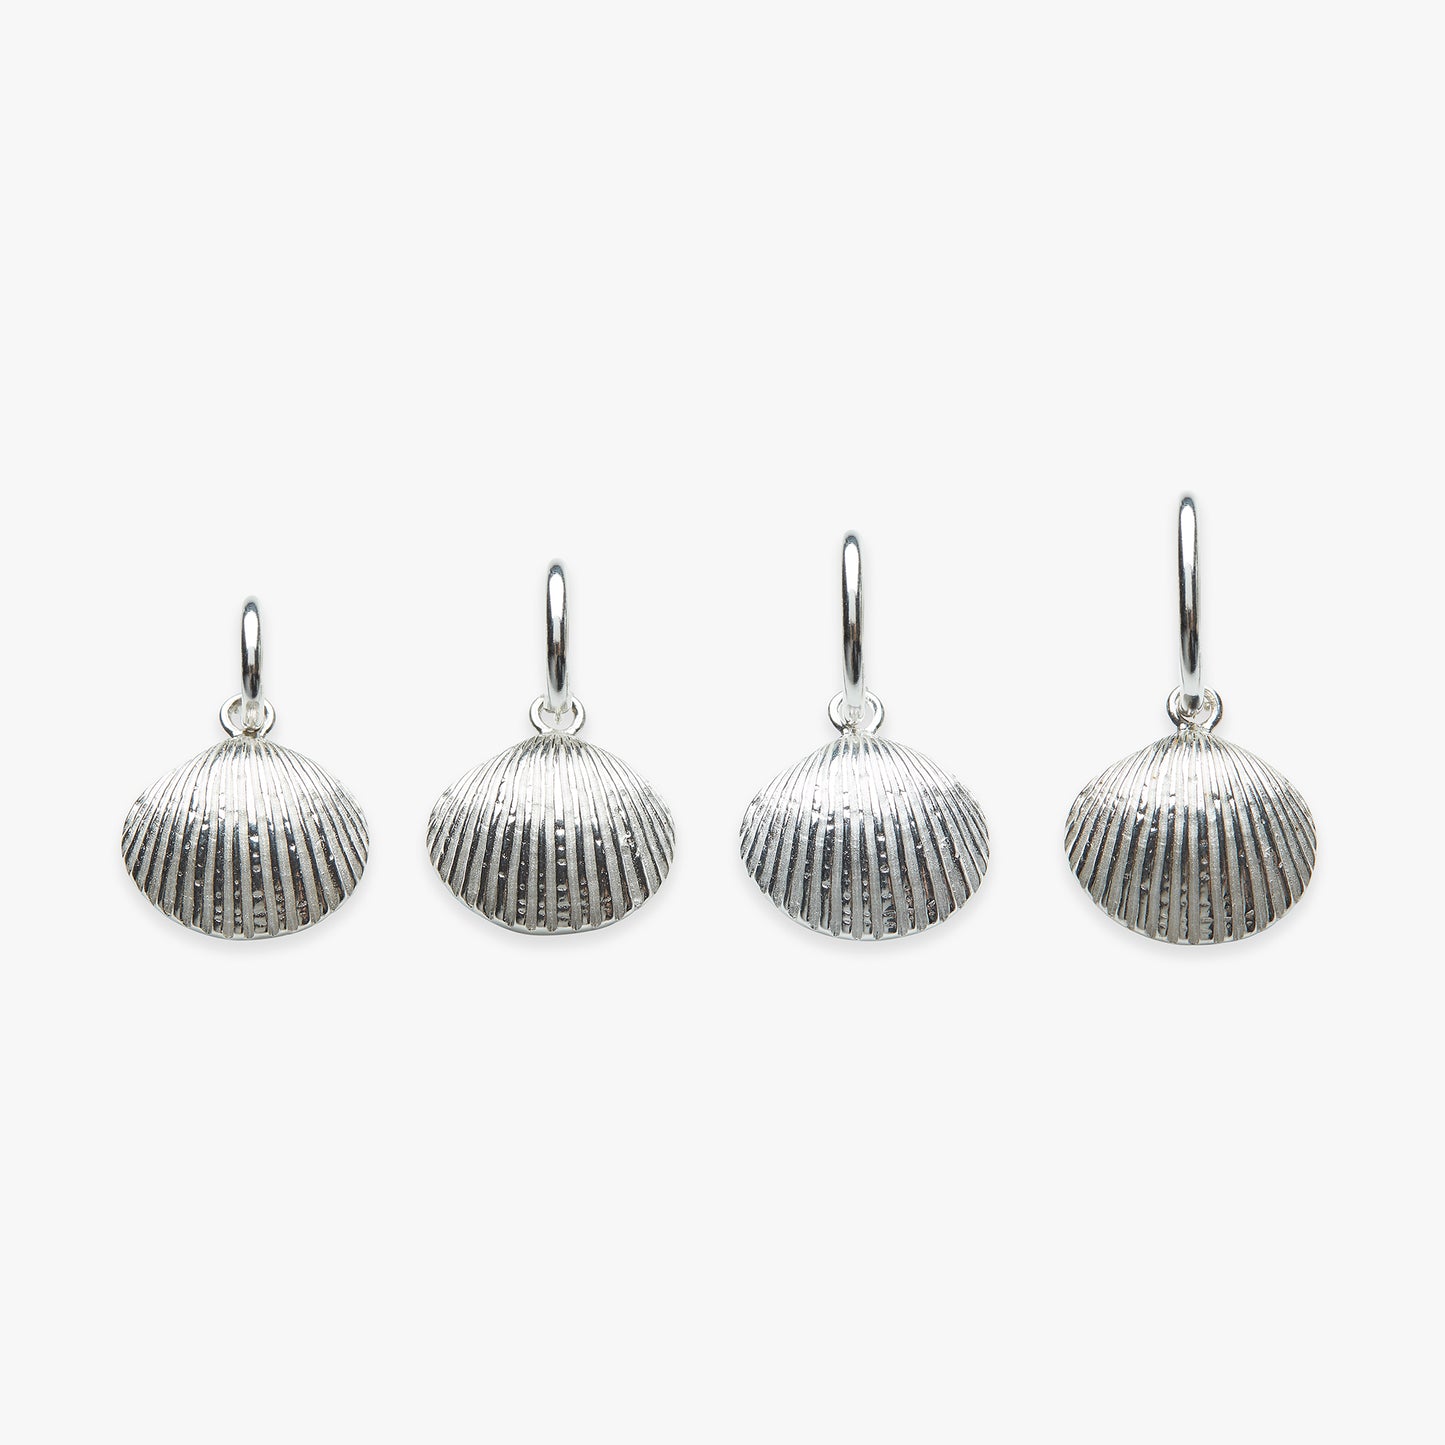 Cockle shell pendant earring silver